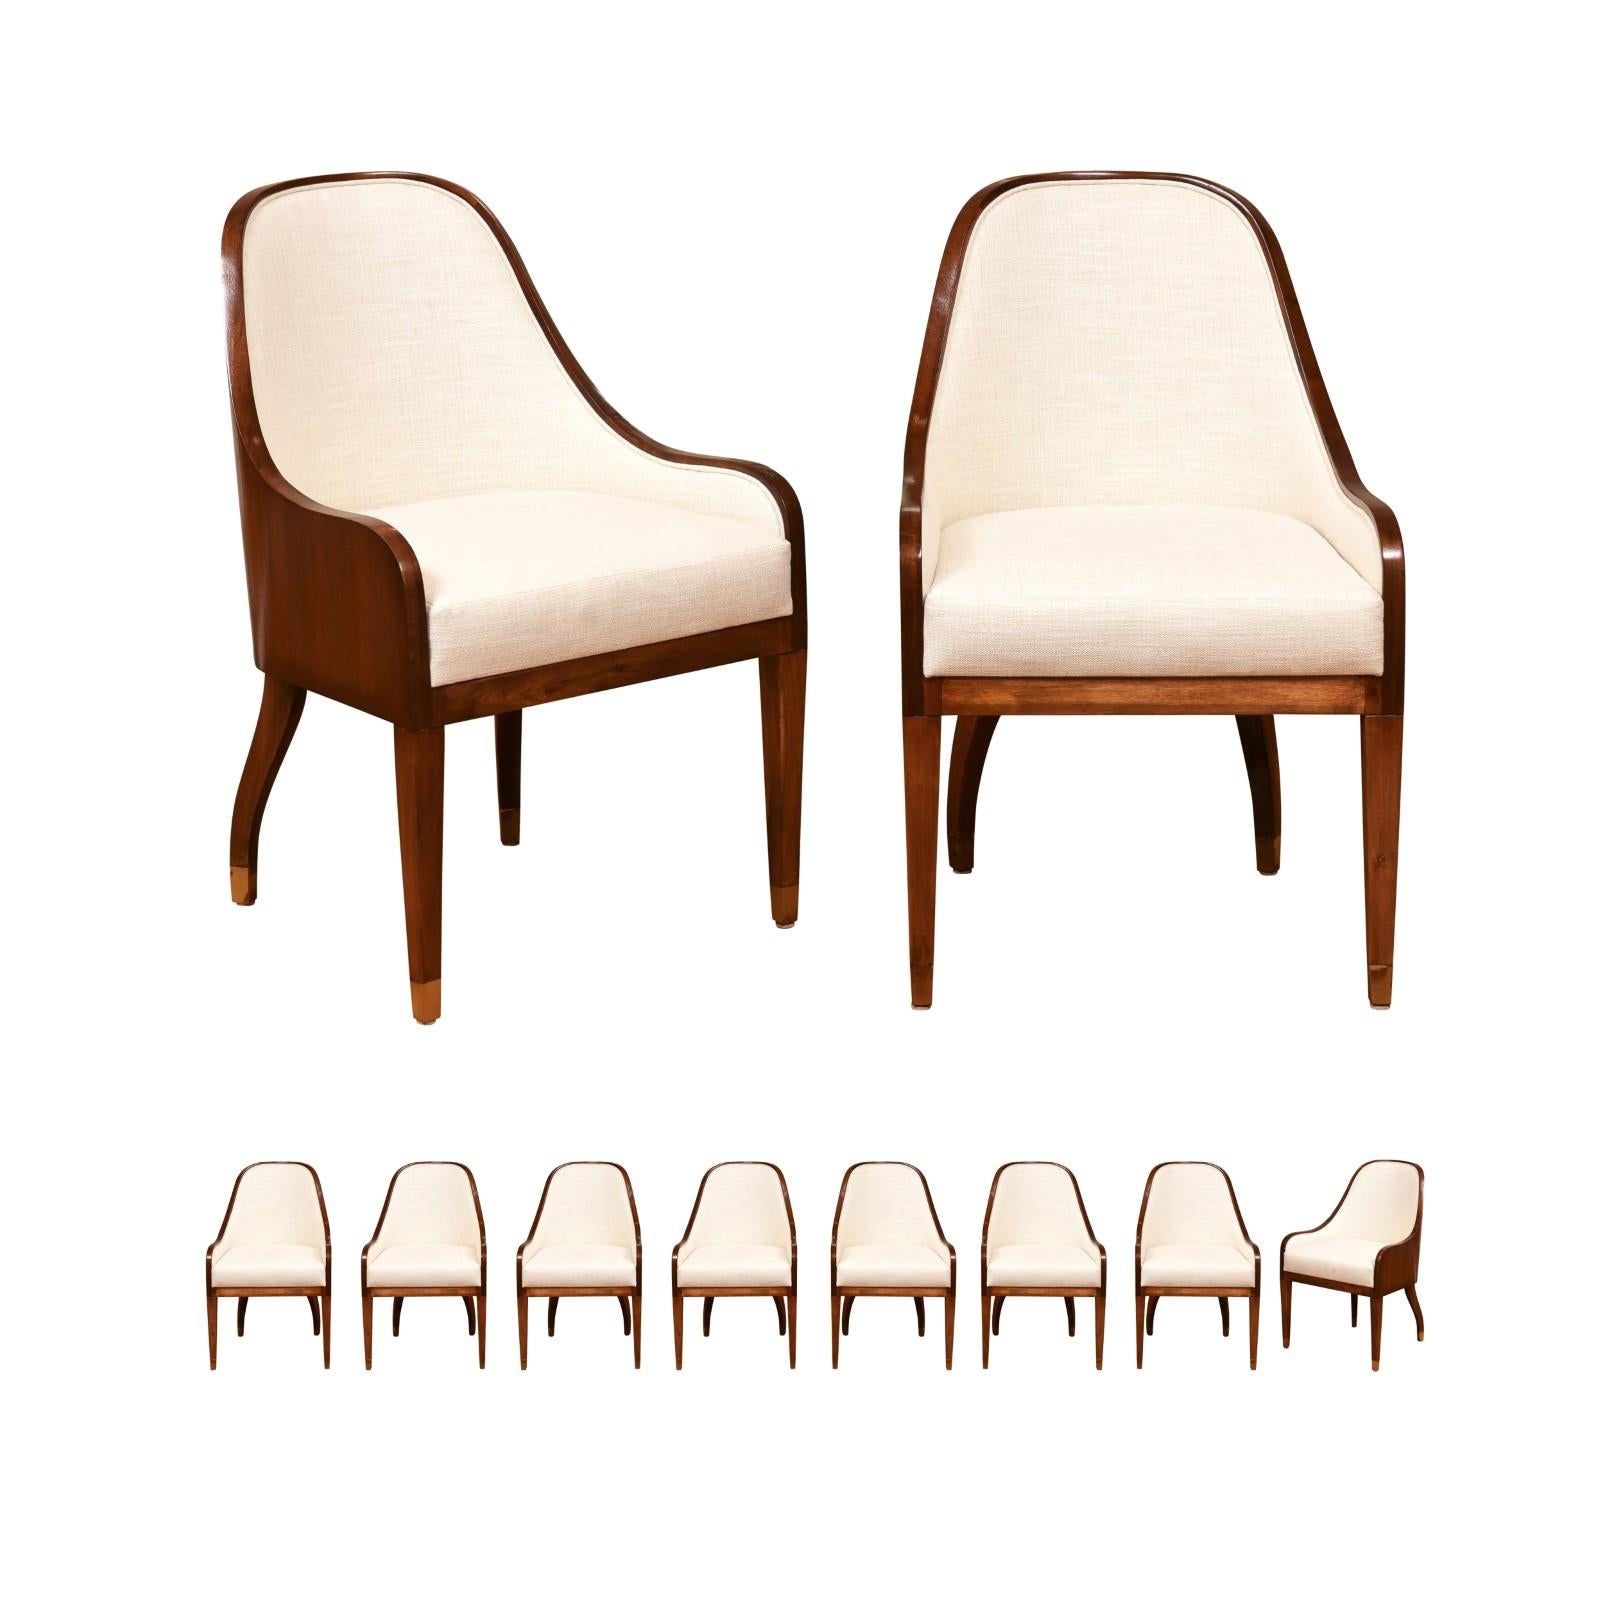 These magnificent chairs are shipped as professionally photographed and described in the listing narrative: Meticulously professionally restored and installation ready. Expert custom upholstery service is available.

An incredible set of ten (10)